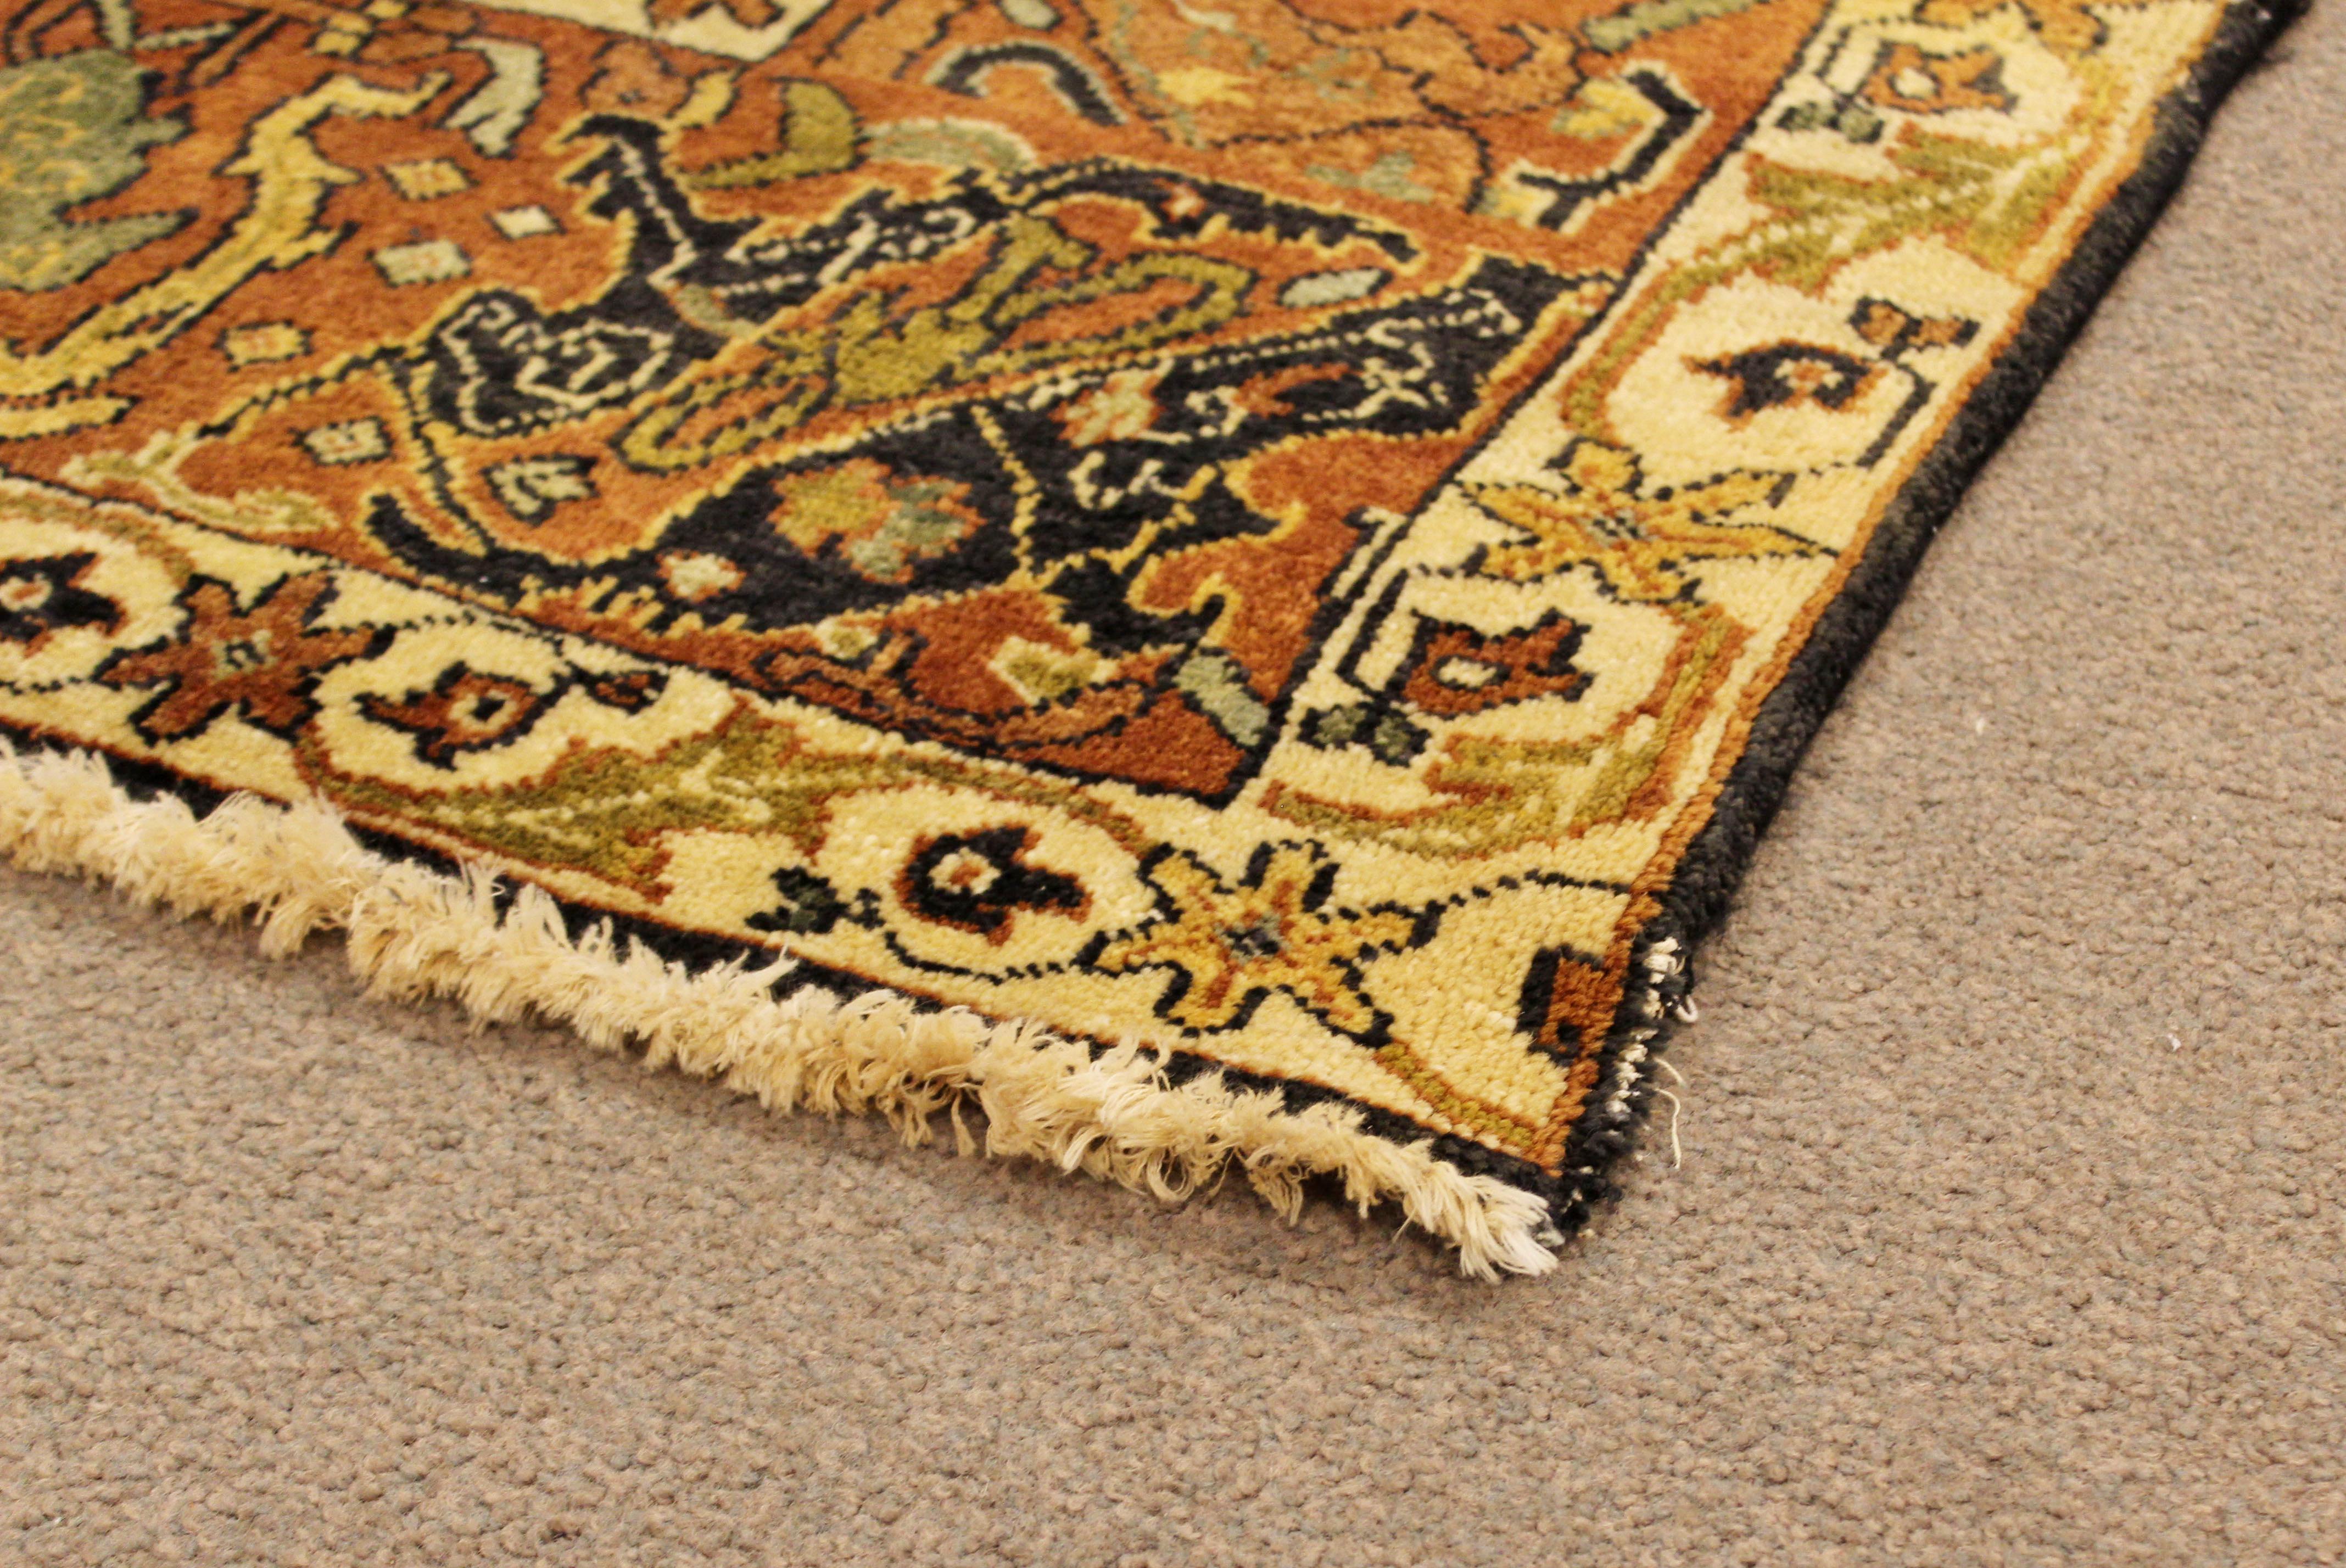 Late 20th Century Mid-Century Modern Rectangular Hand Knotted 100% Wool Area Rug Carpet Made India